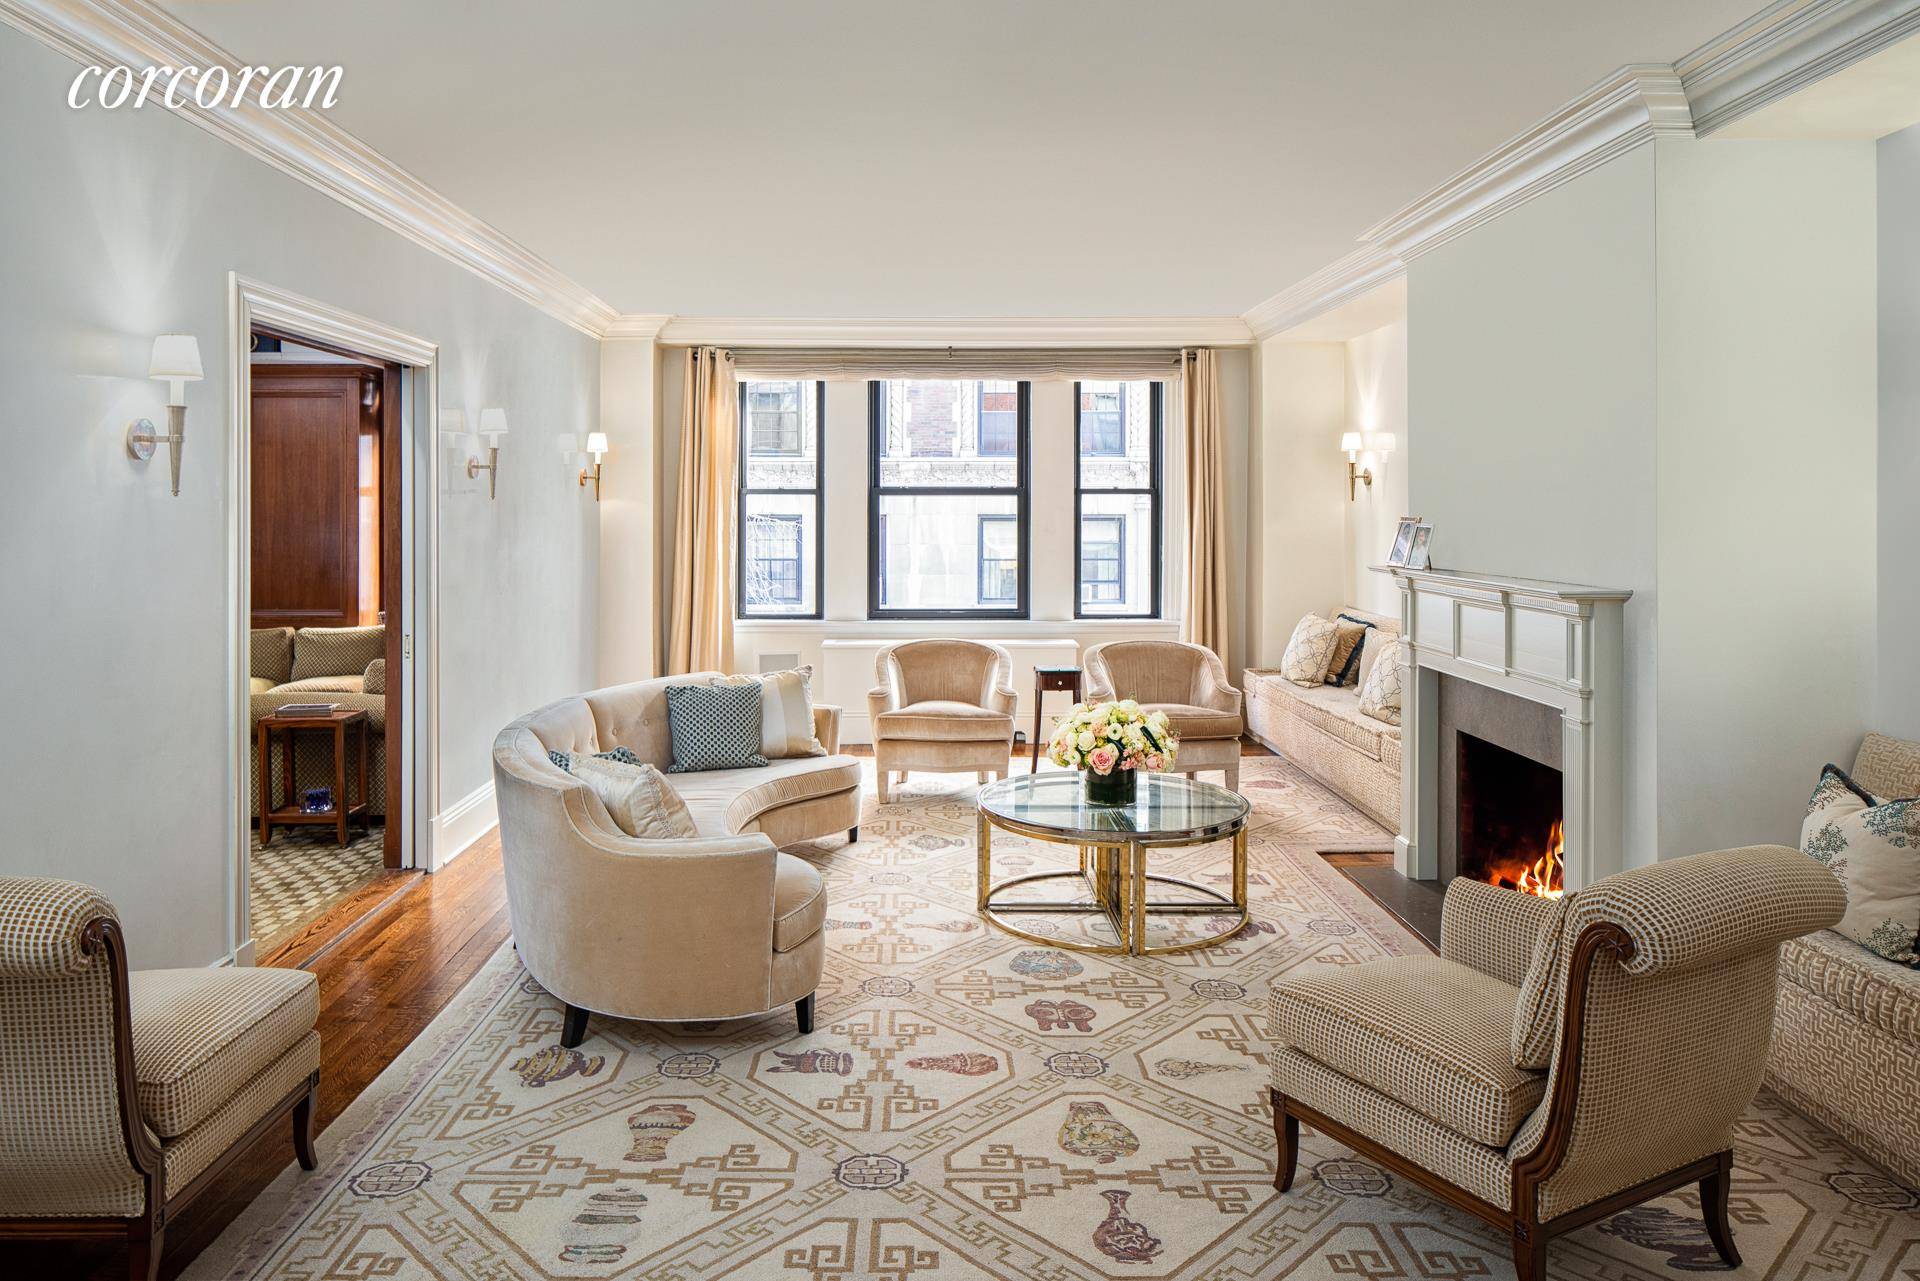 This mint prewar Park Avenue residence has five bedrooms and five renovated full bathrooms, and is located in one of Carnegie Hill's premier co operatives designed by Emery Roth.